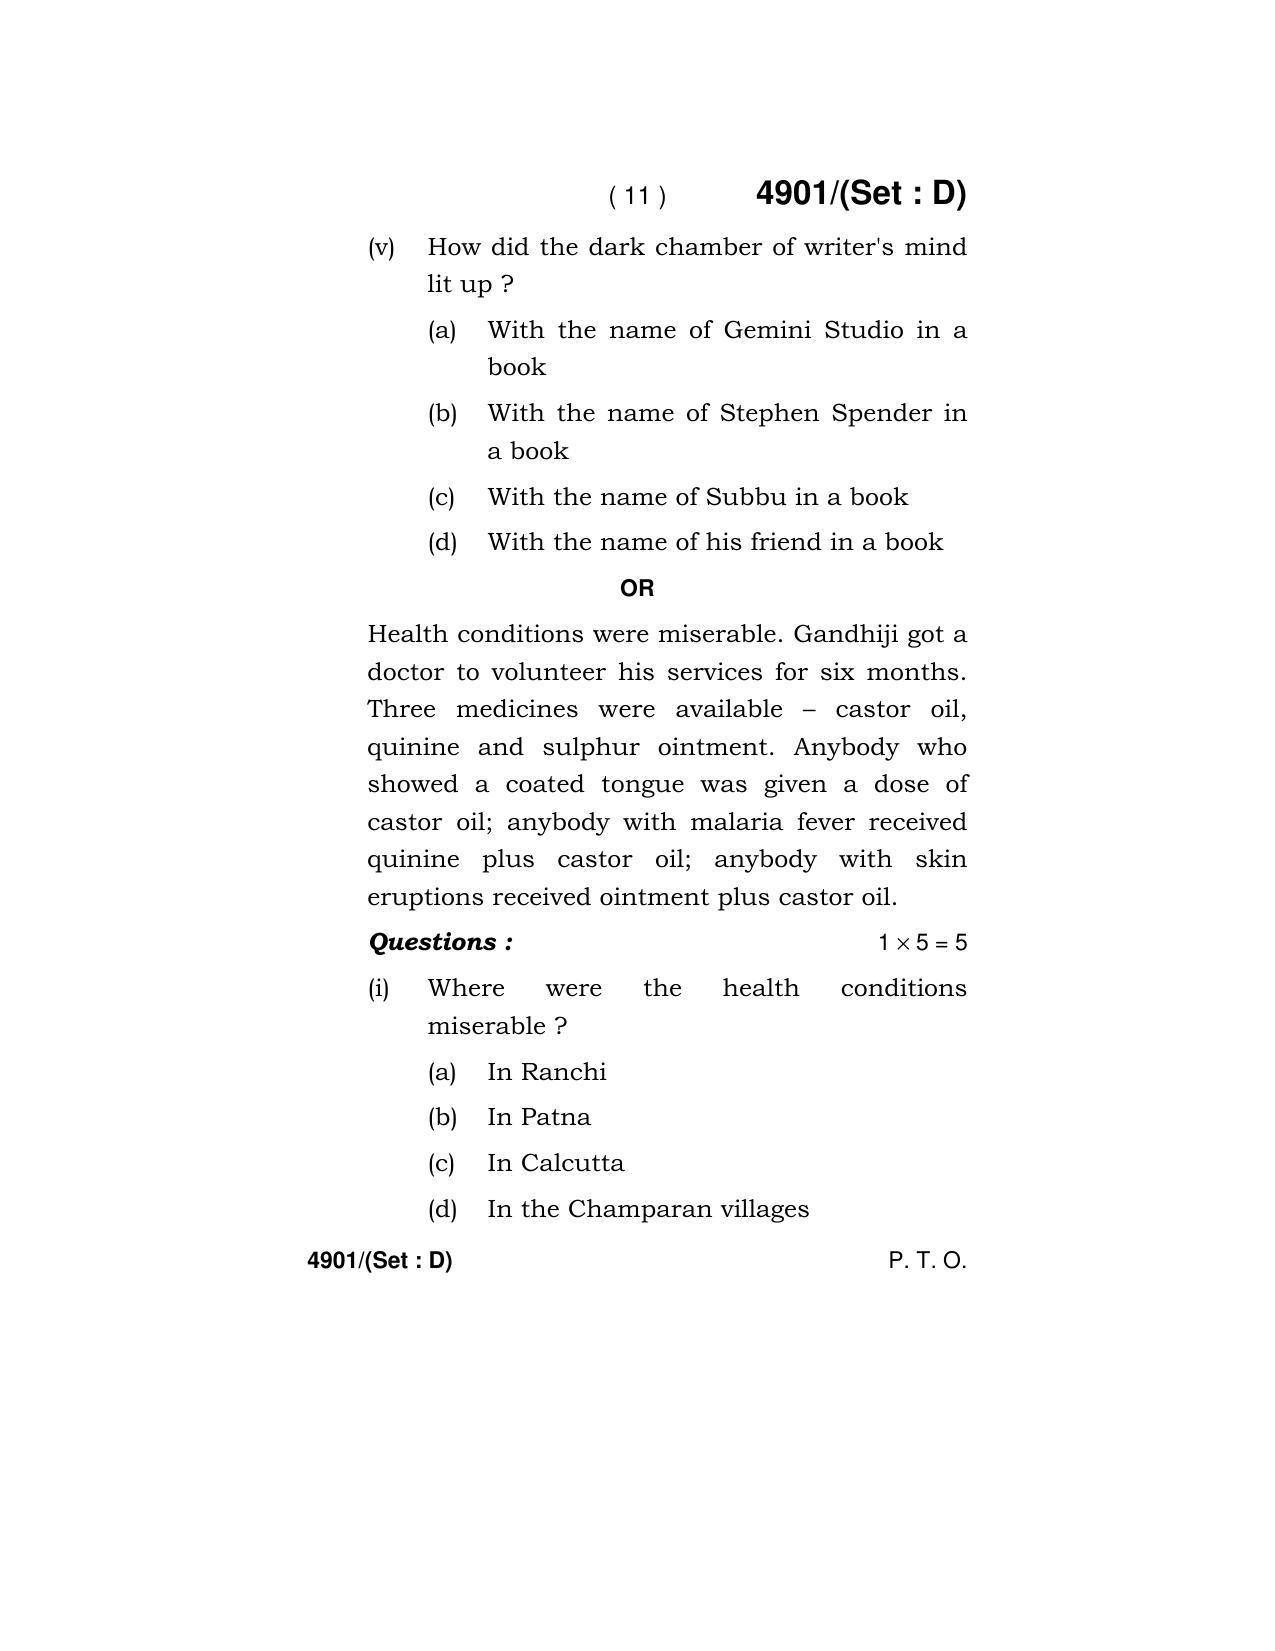 Haryana Board HBSE Class 12 English Core 2020 Question Paper - Page 59